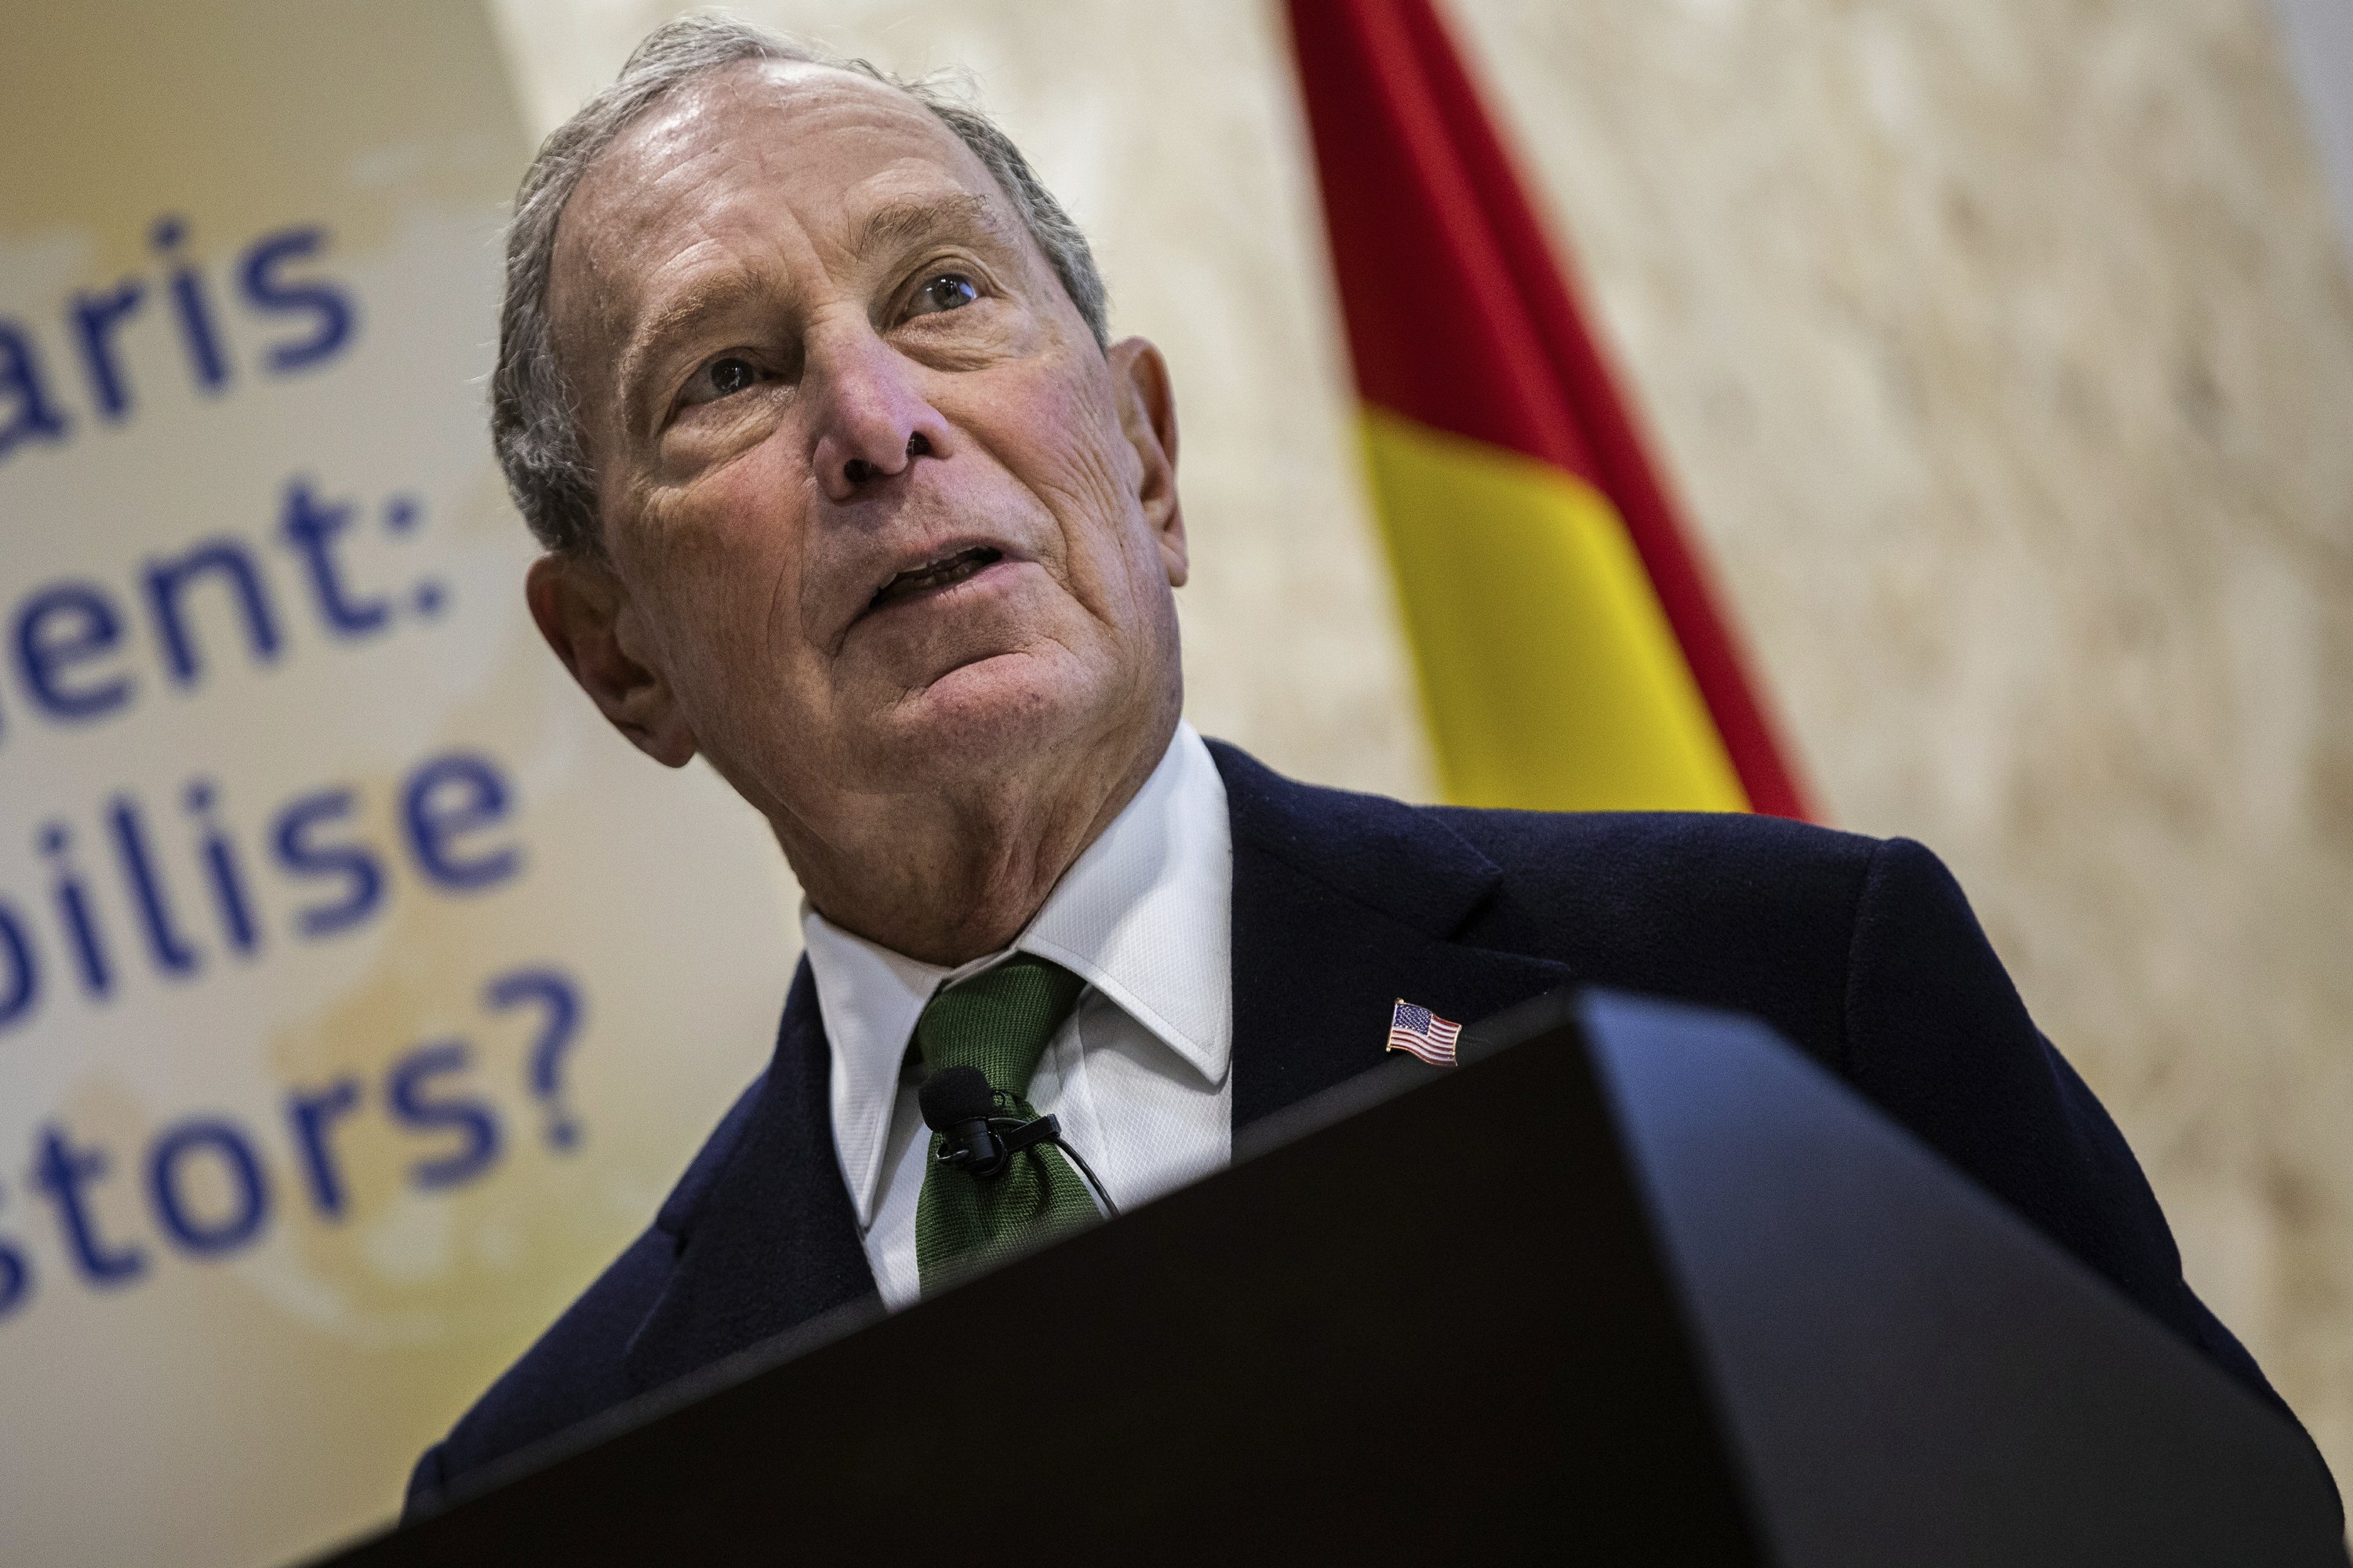 Bloomberg tells UN climate talks: You can count on the US - The Associated Press